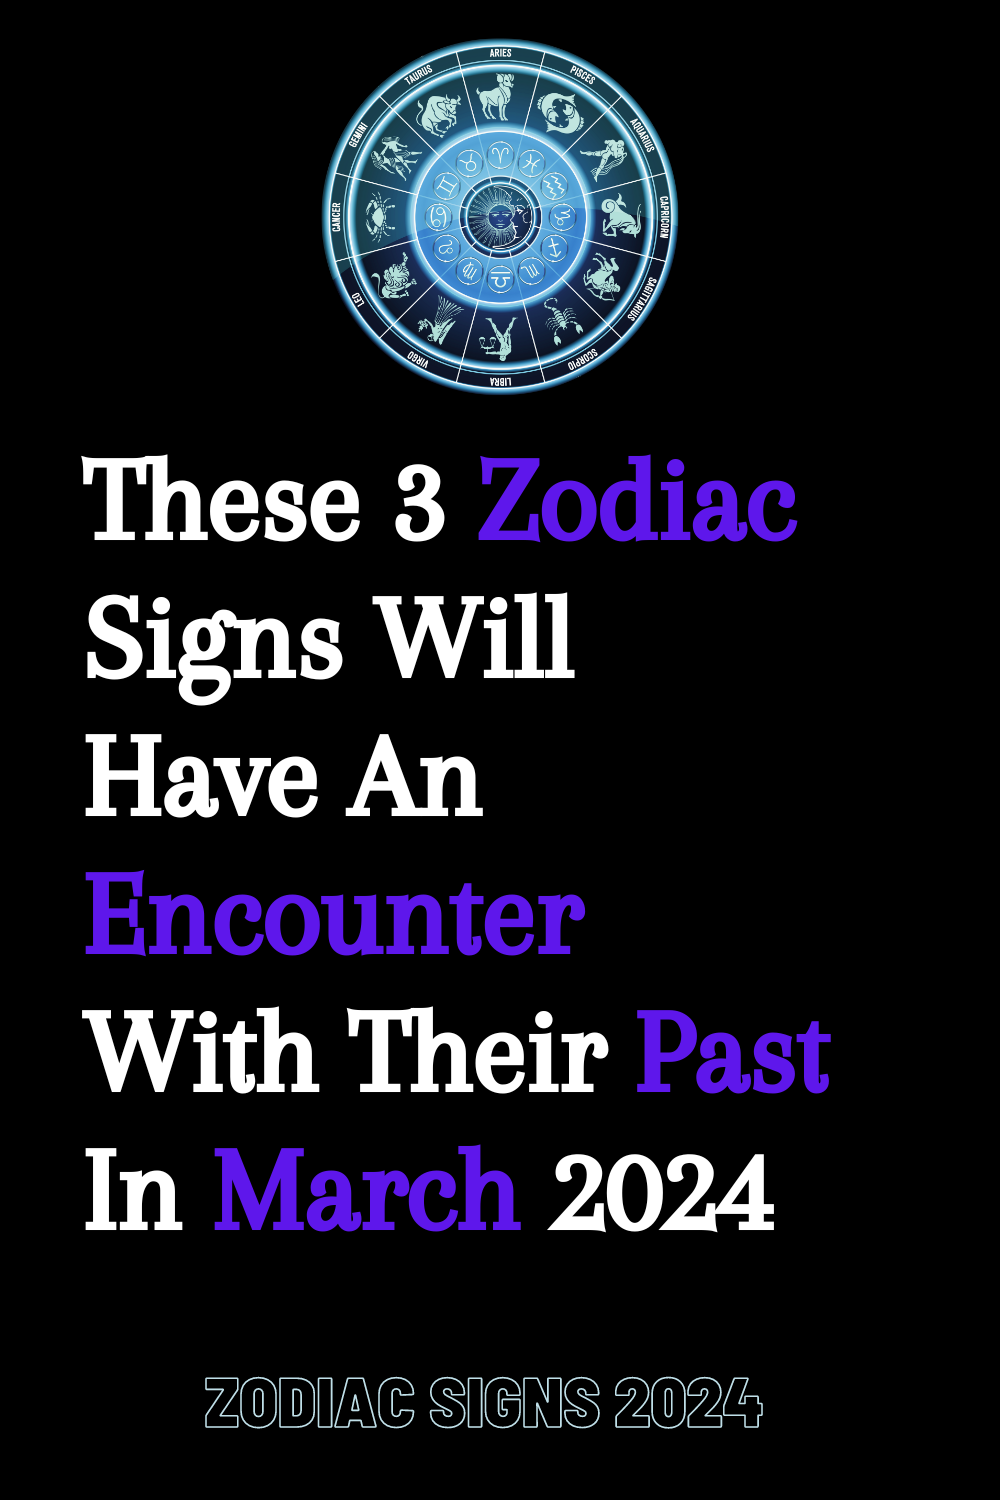 These 3 Zodiac Signs Will Have An Encounter With Their Past In March ...